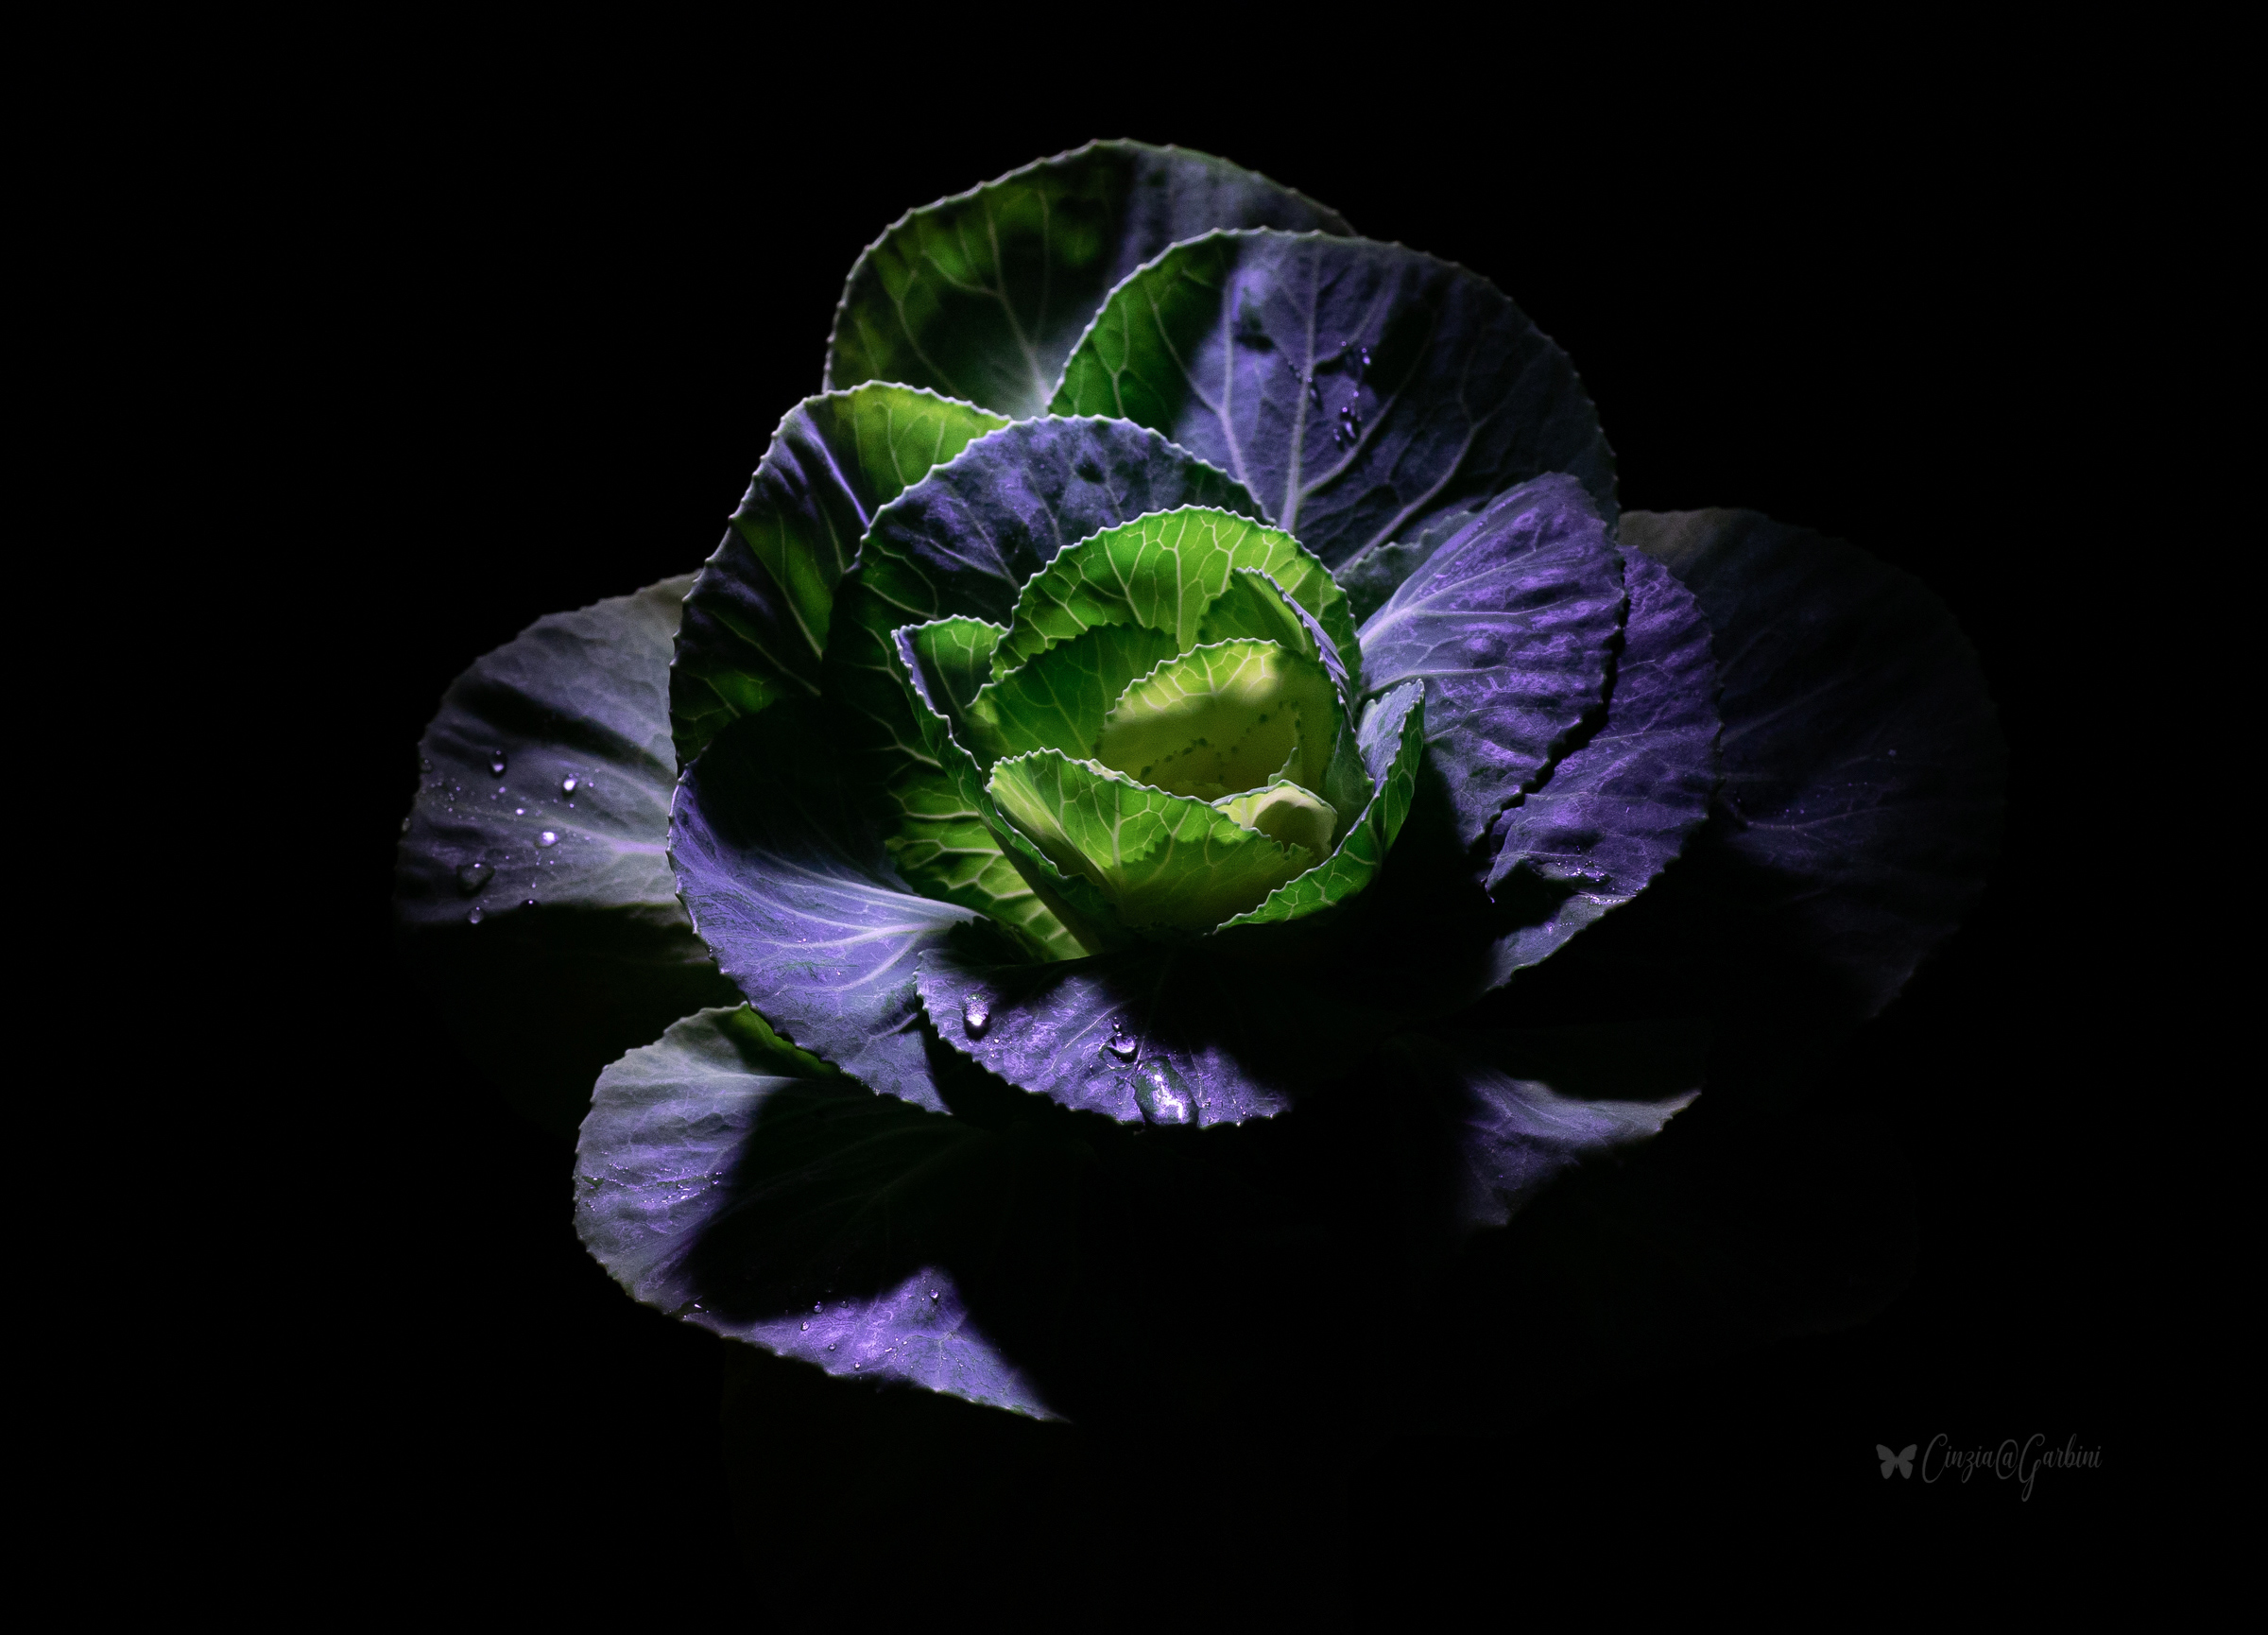 what a photo of the ... cabbage...